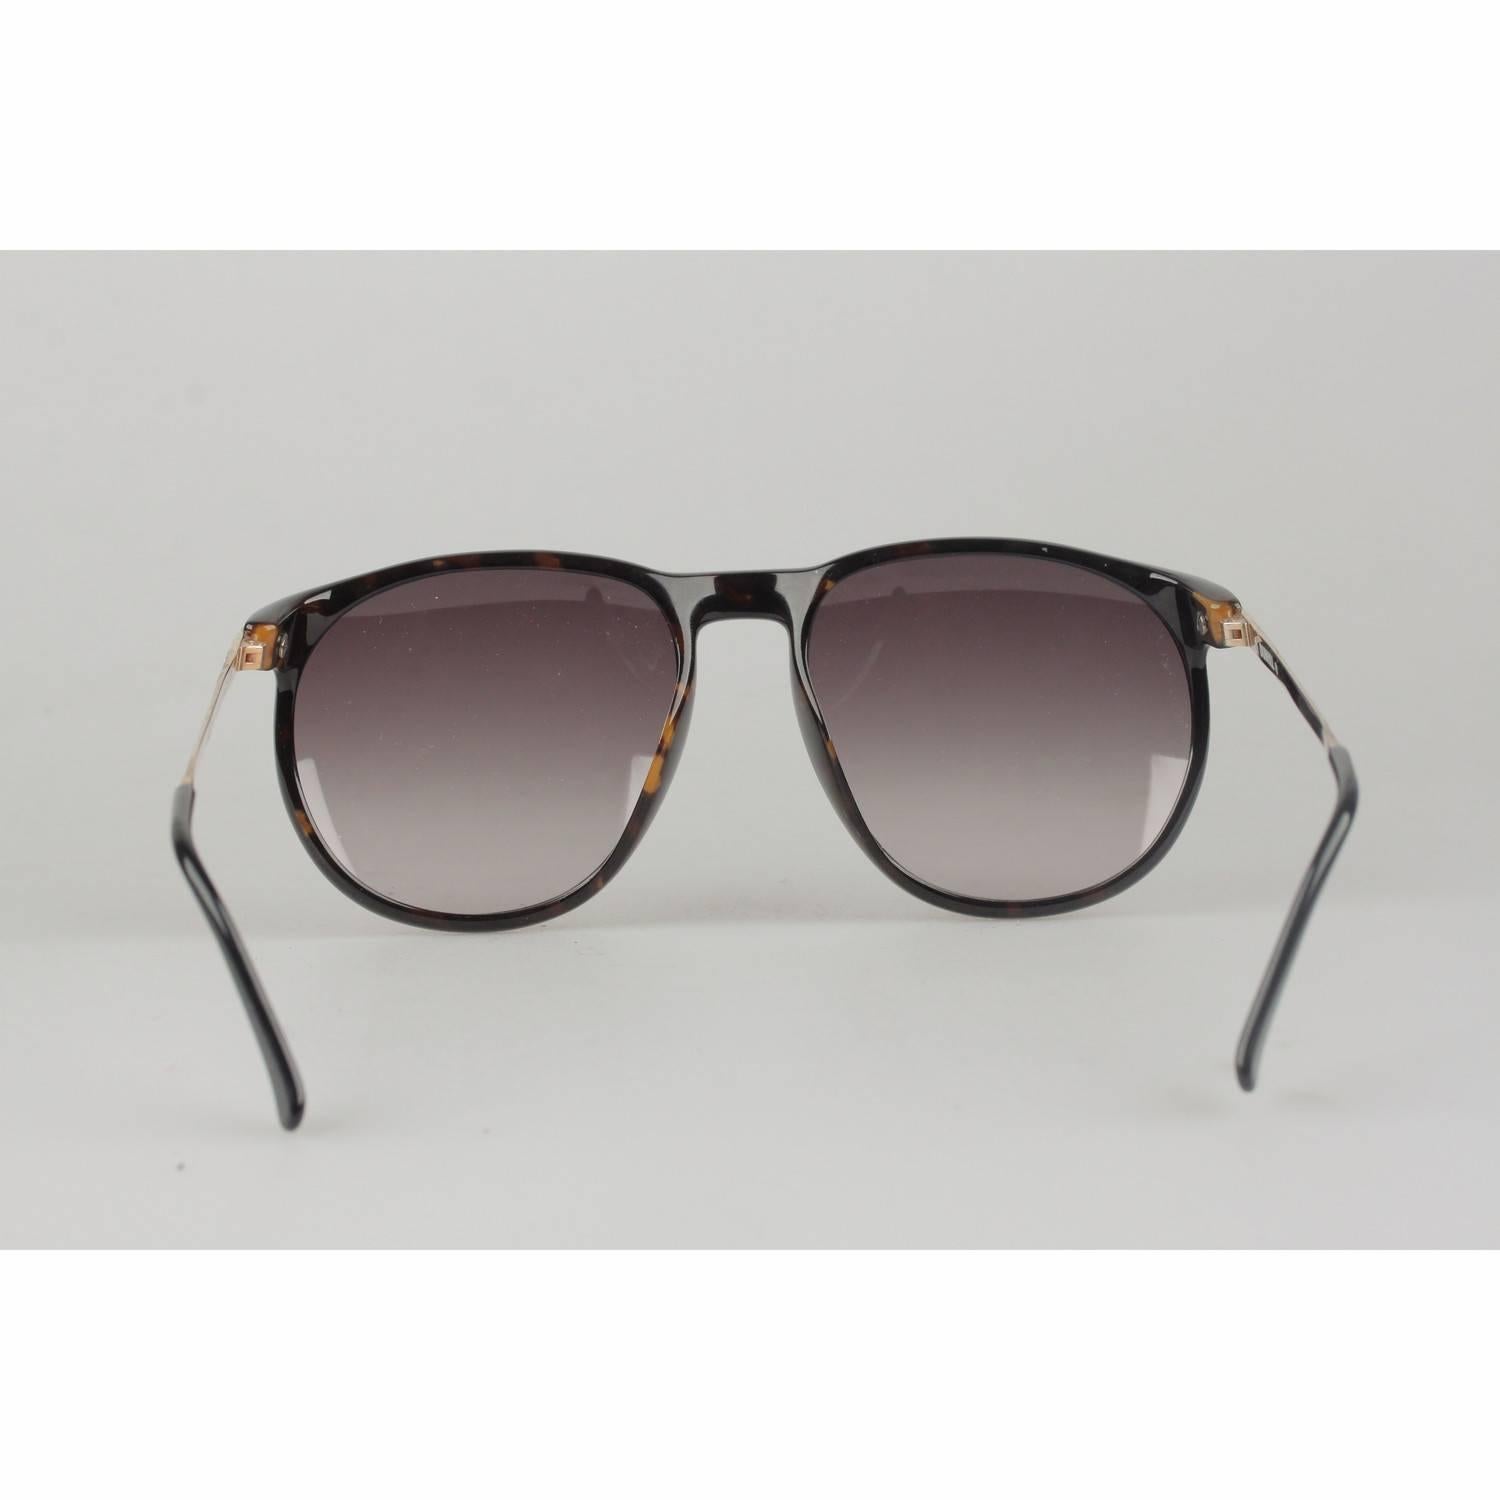 Women's or Men's DUNHILL Vintage Sunglasses 6026 OPTYL 57-17mm 140 New Old Stock